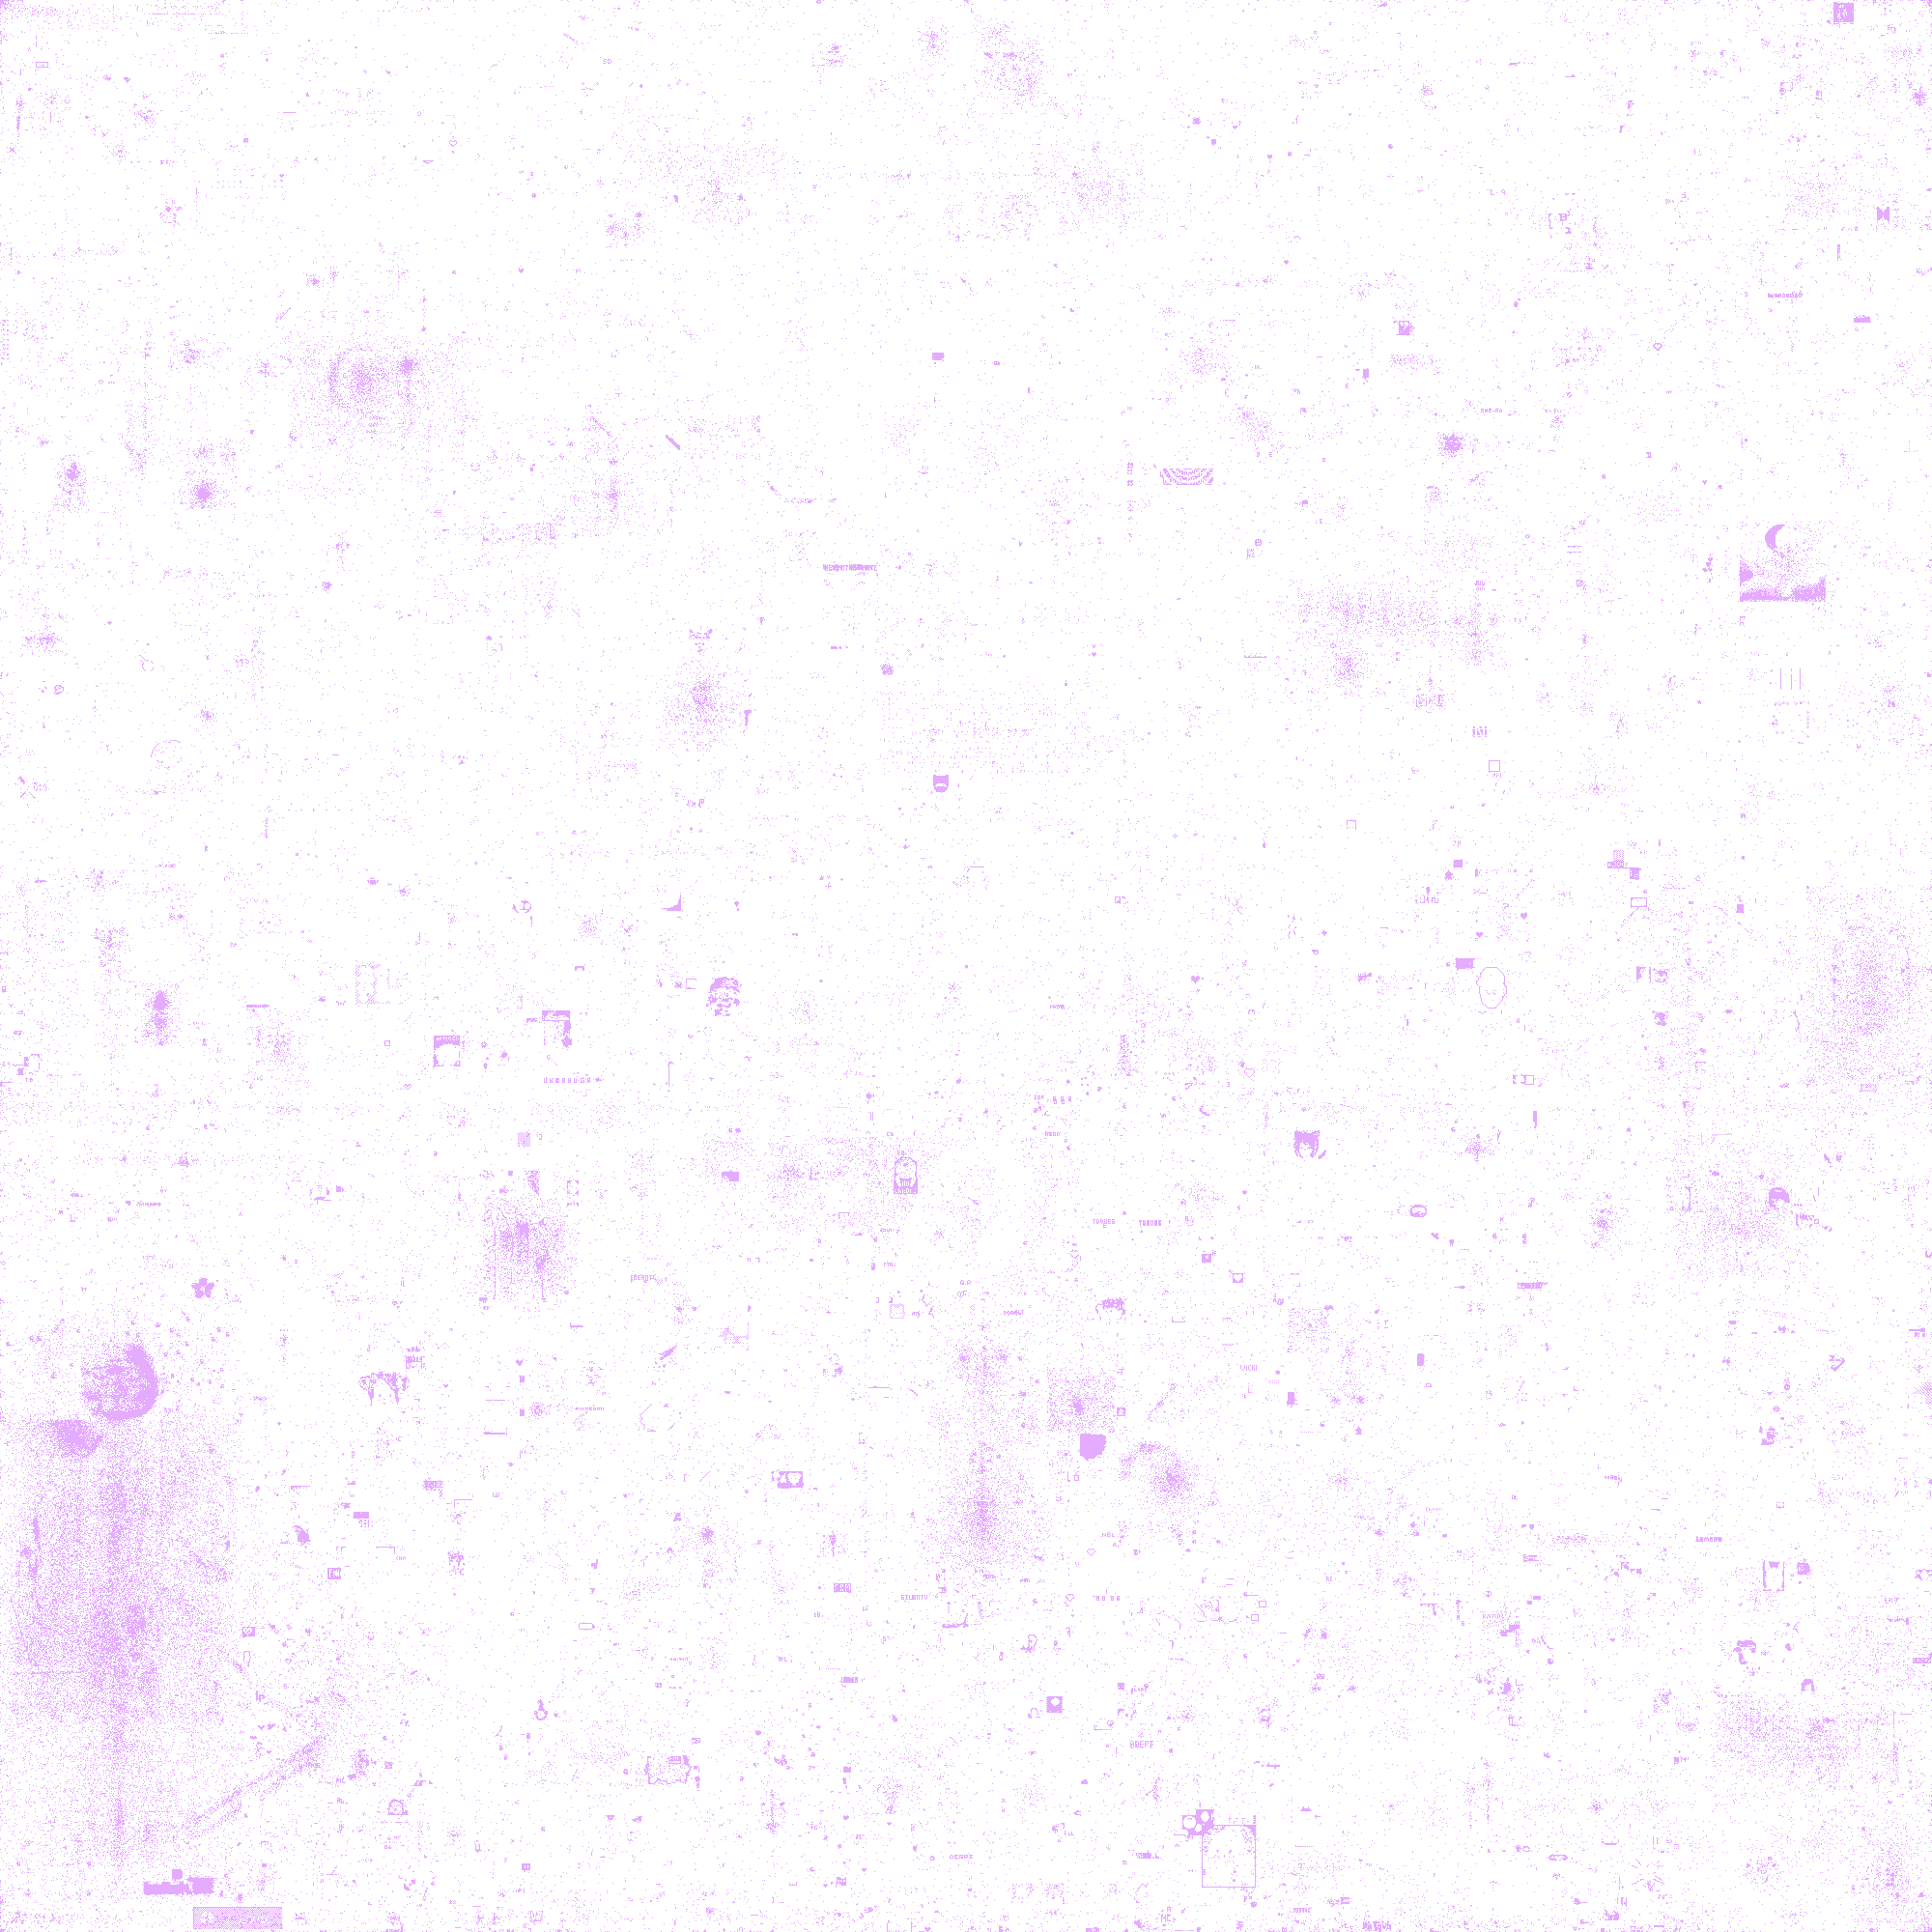 Pale Purple Only Visualization'